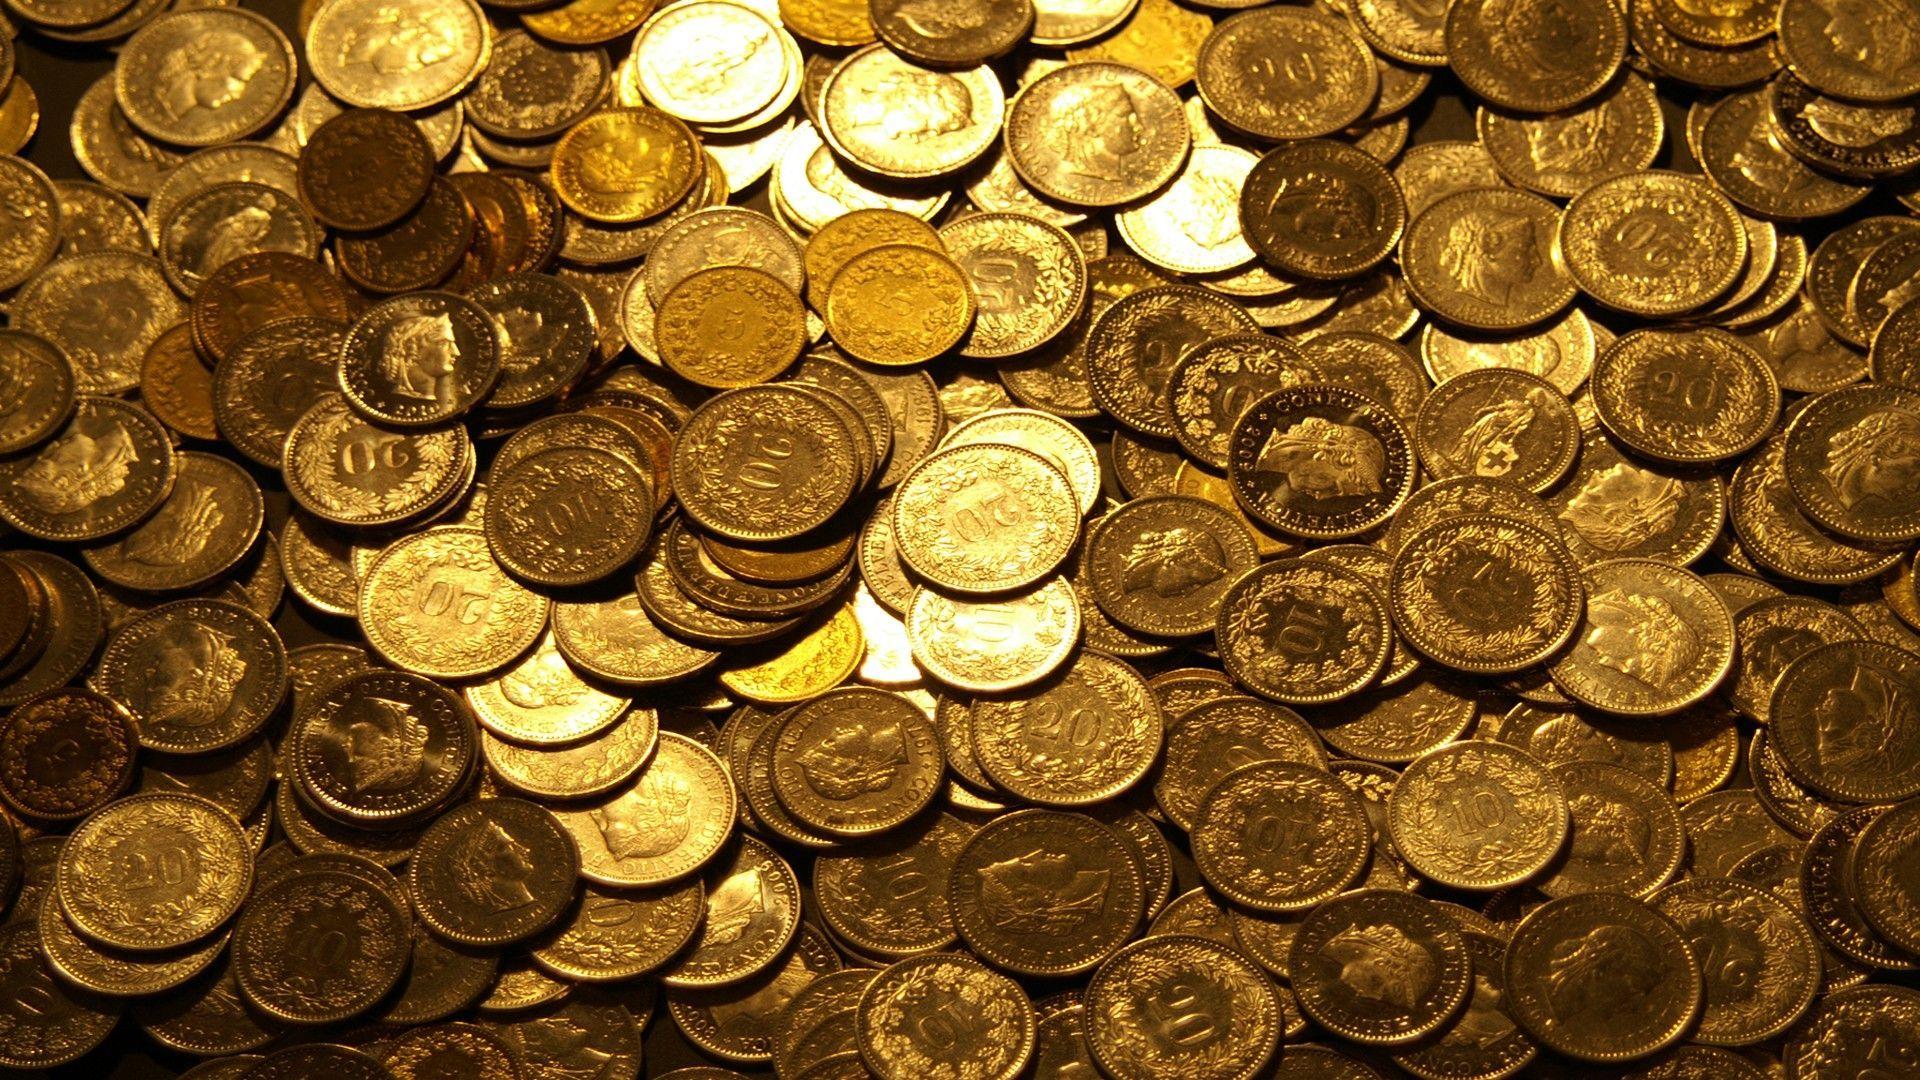 coins high quality new desktop wide wallpaper in widescreen free